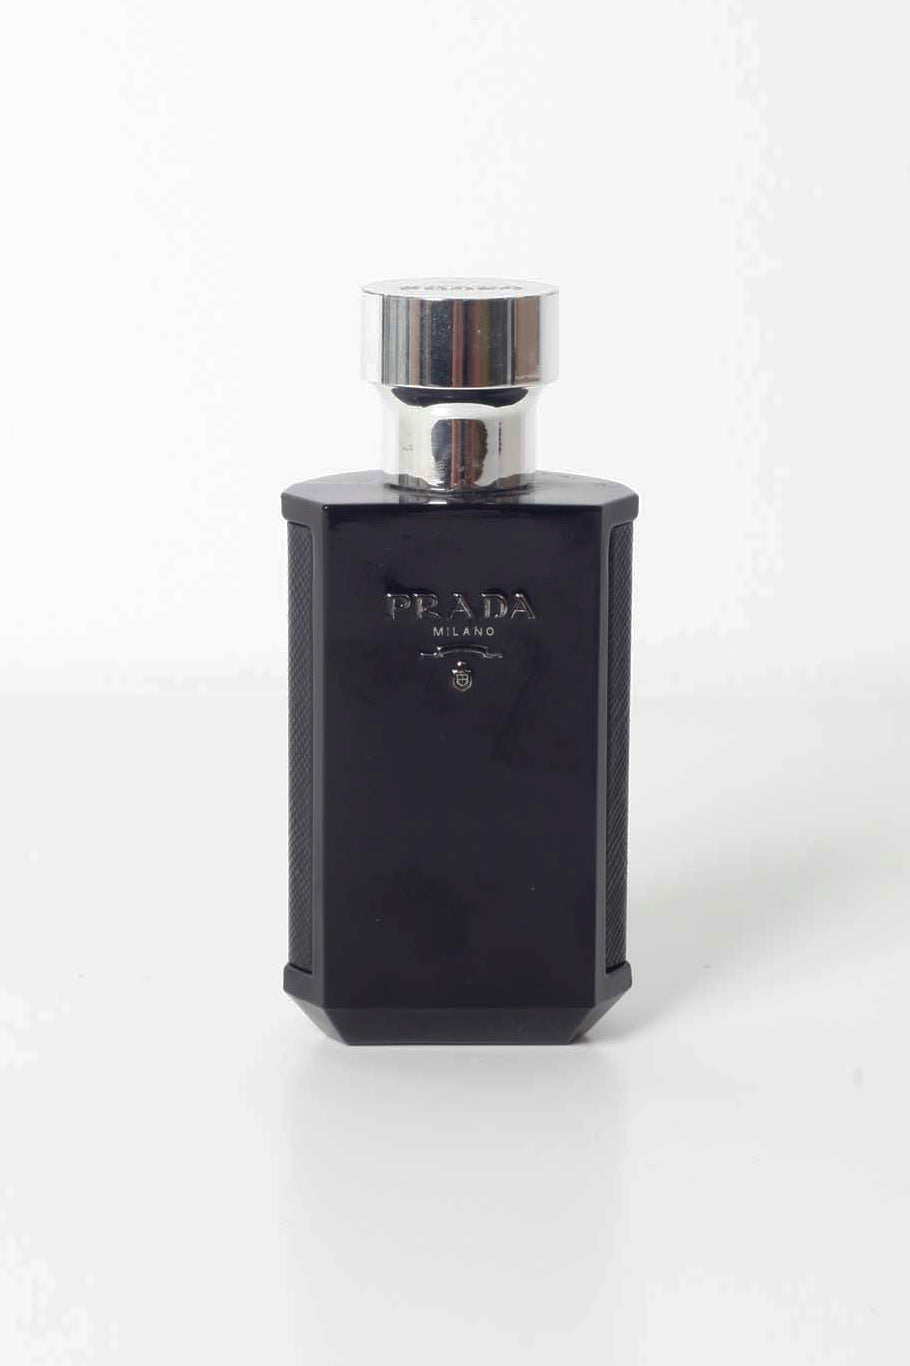 Luxury Perfume Bottles For Styling (7 pieces)